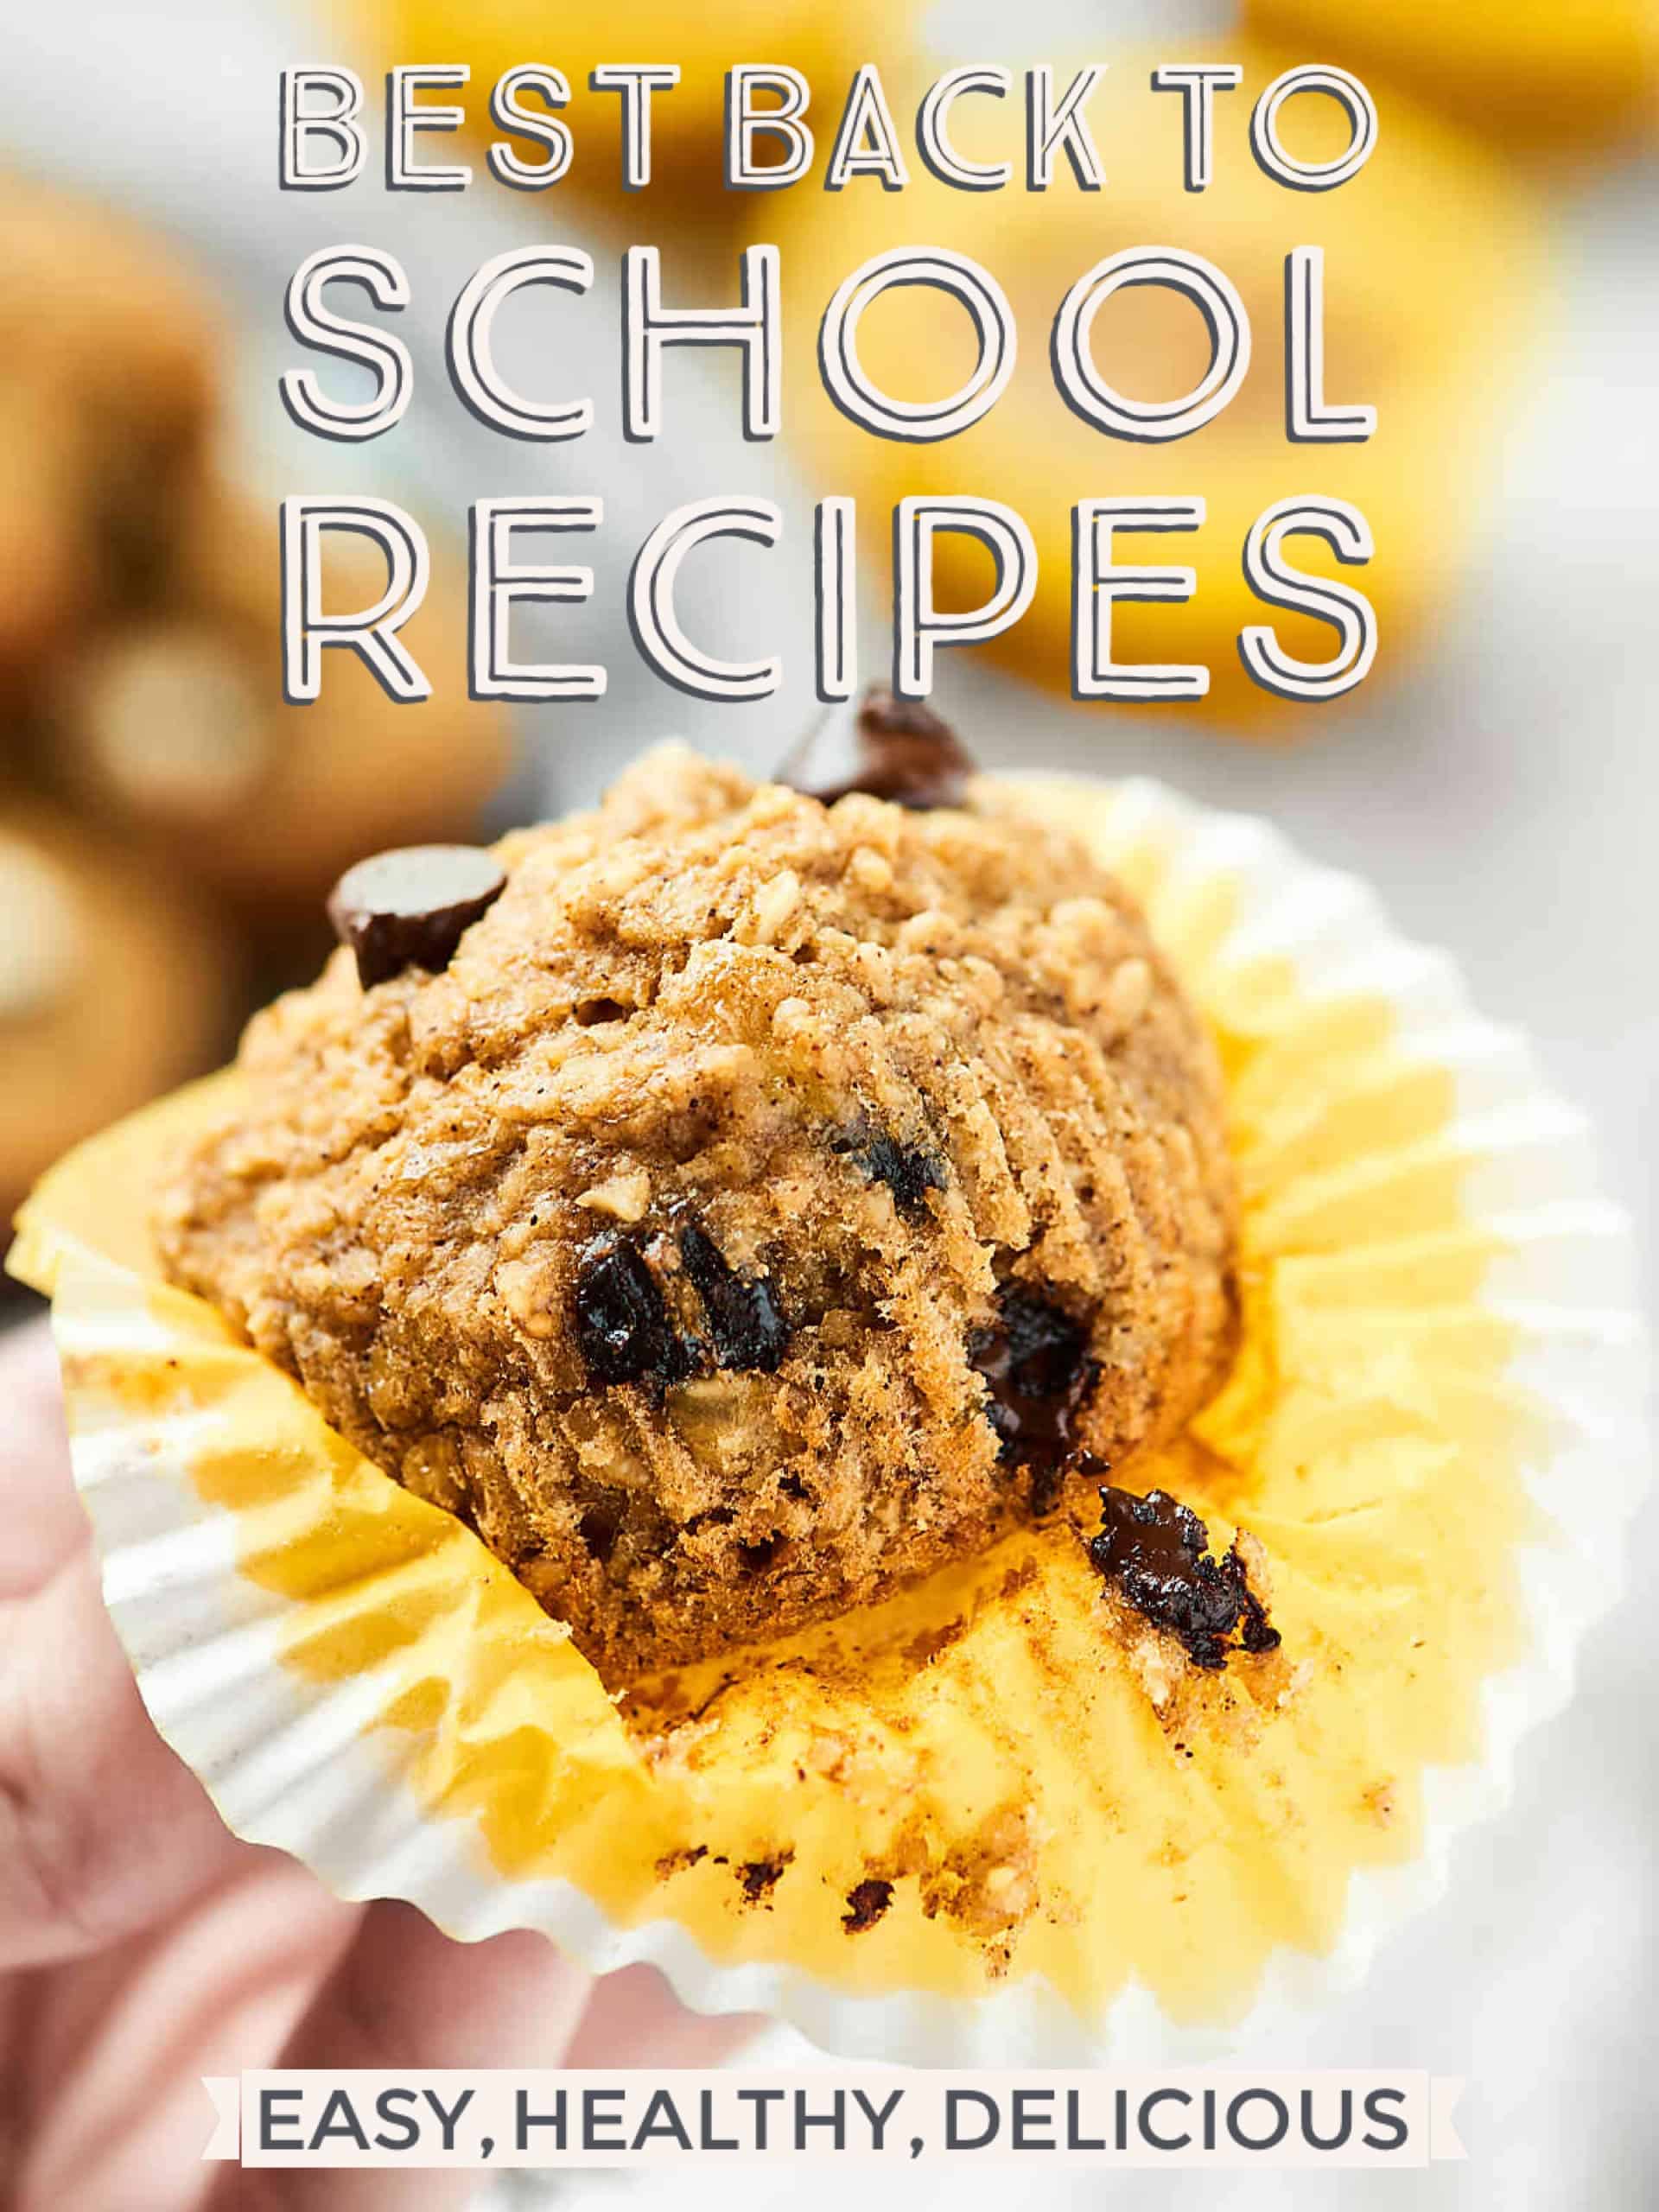 The Best Back to School Recipes for 2016! Everything from healthy breakfasts to make ahead lunches, after school snacks, slow cooker dinners, and after dinner sweet treats. We've got you covered! Let's do this. showmetheyummy.com #backtoschool #backtoschoolrecipes